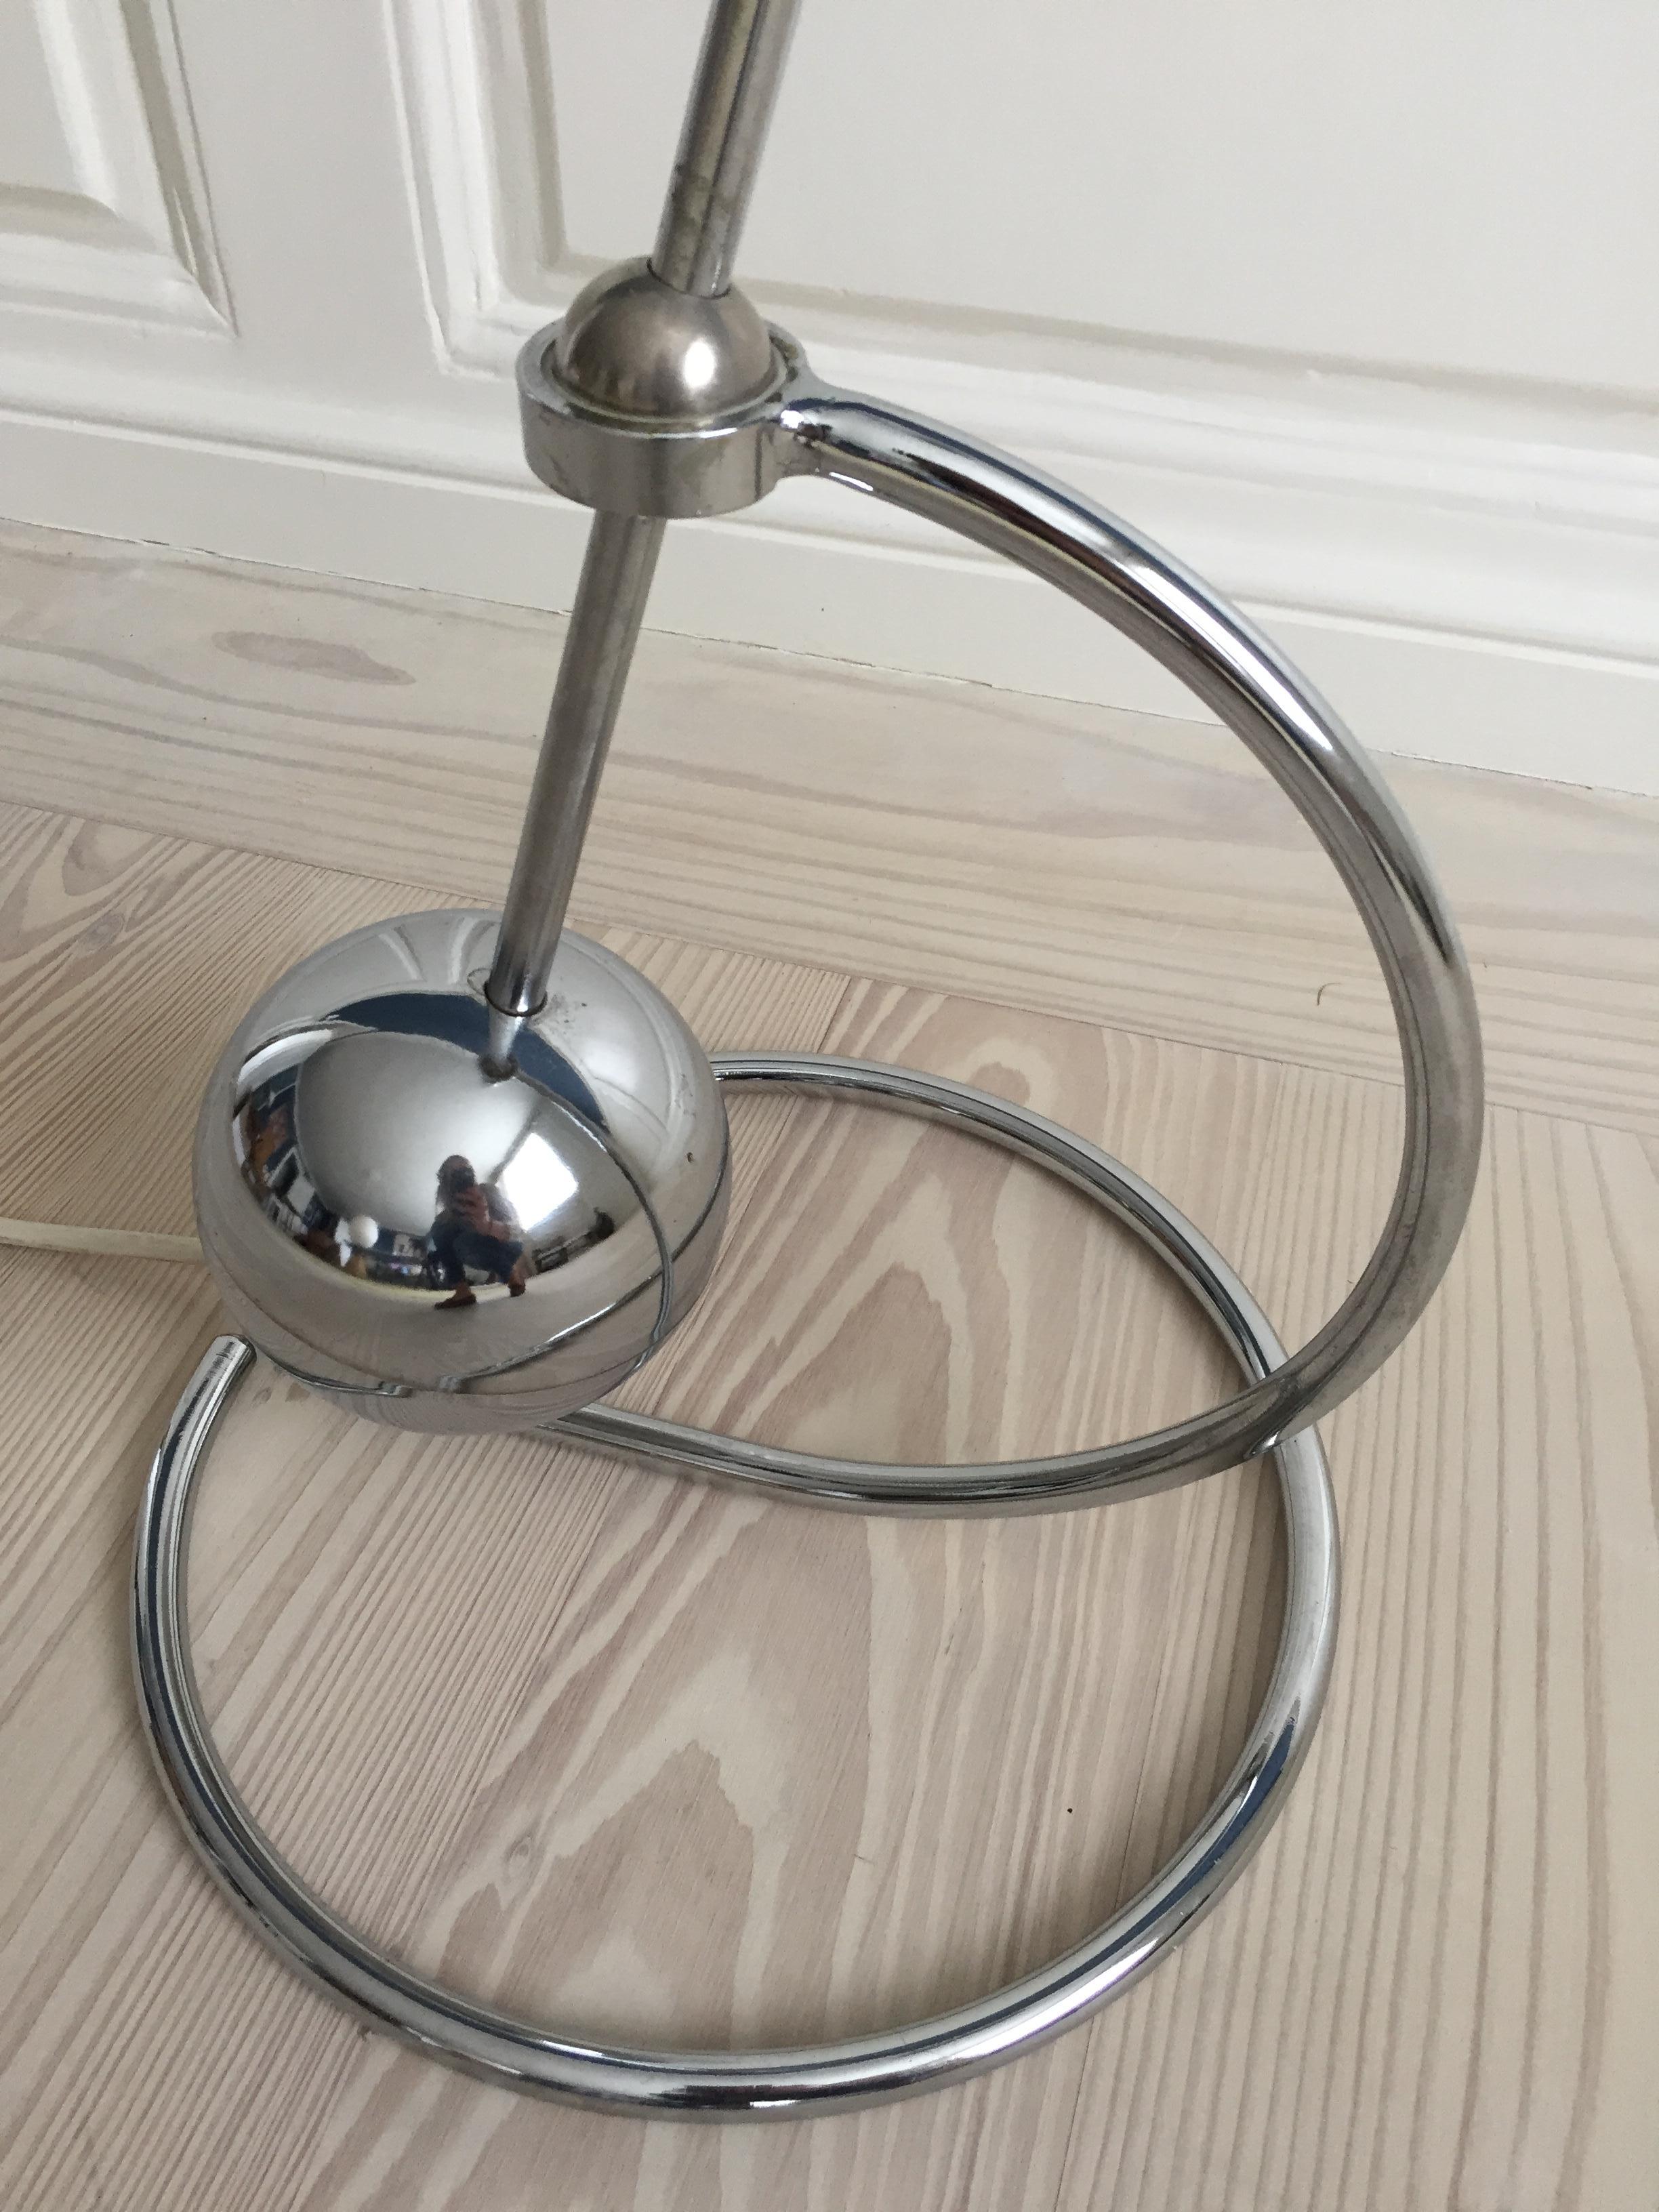 Vintage Paolo Tilche '3s' Adjustable Floor Lamp in Chrome Metal, Italy, 1970s For Sale 1